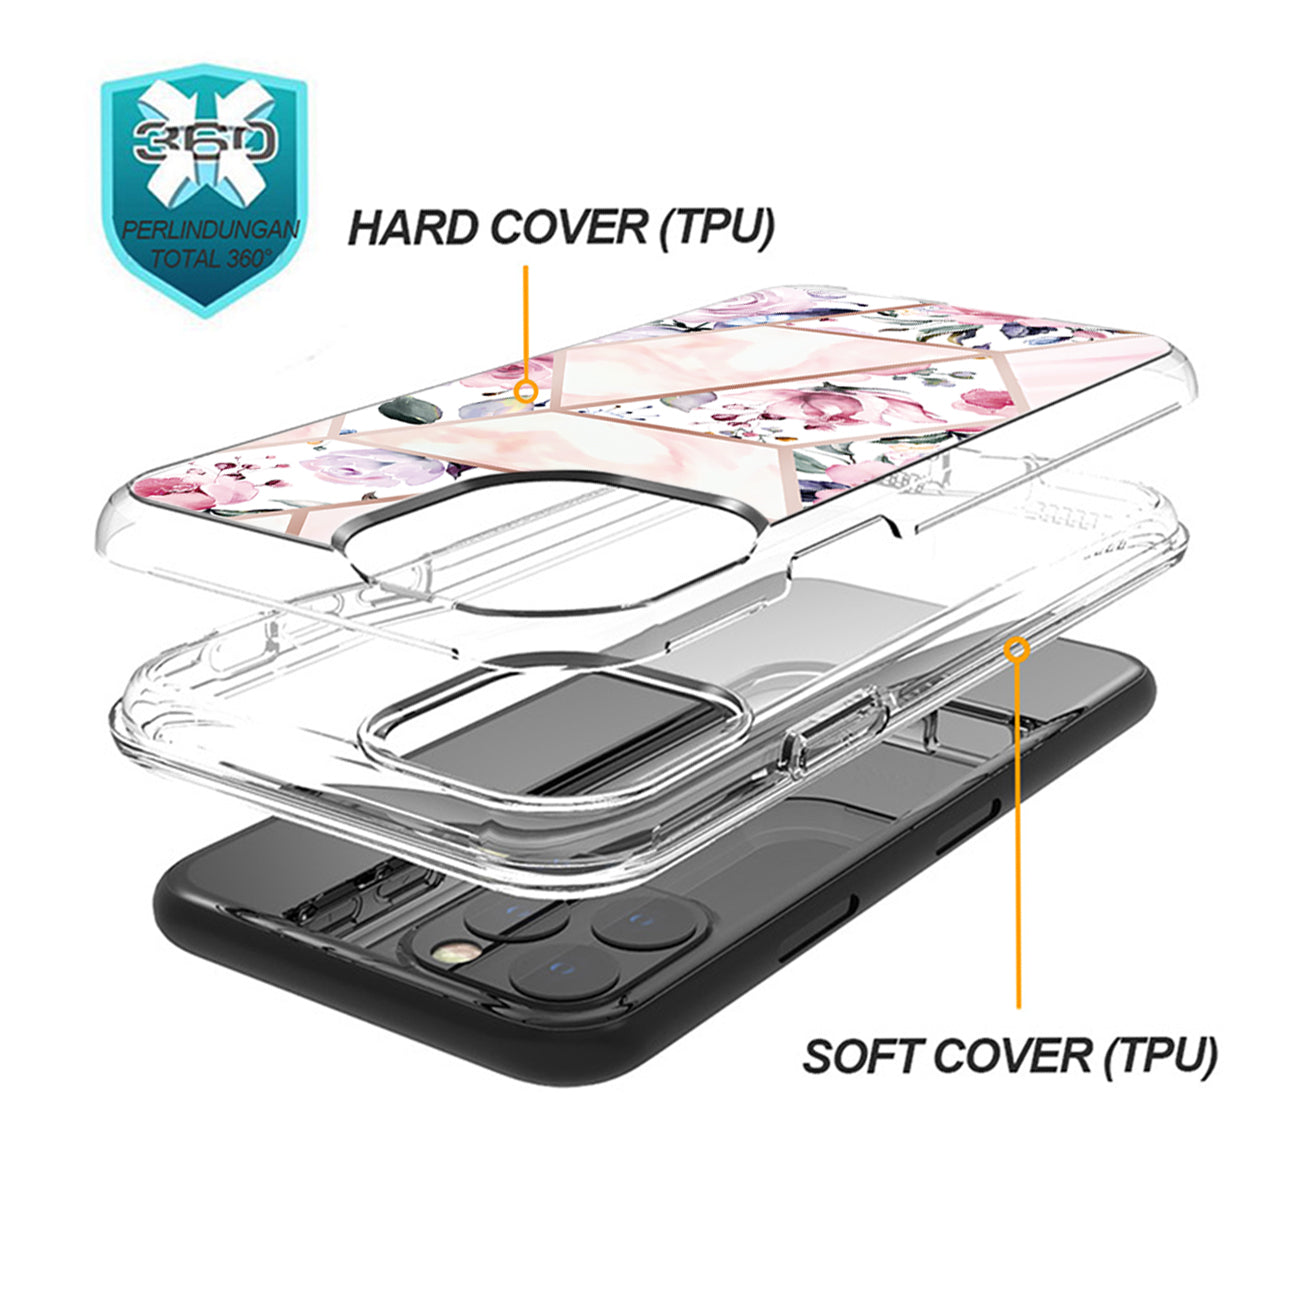 Flower Design Dual Layer Hybrid Hard & Soft TPU Case for IPH 12/IPH 12 PRO In Pink Base Flower